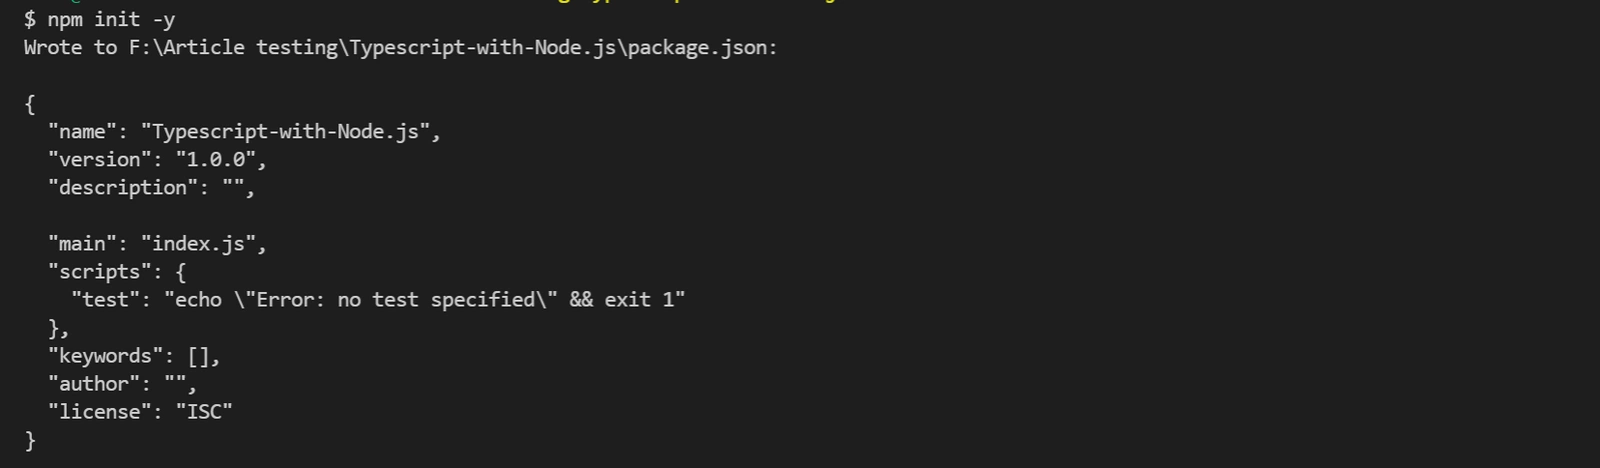 packages.json file